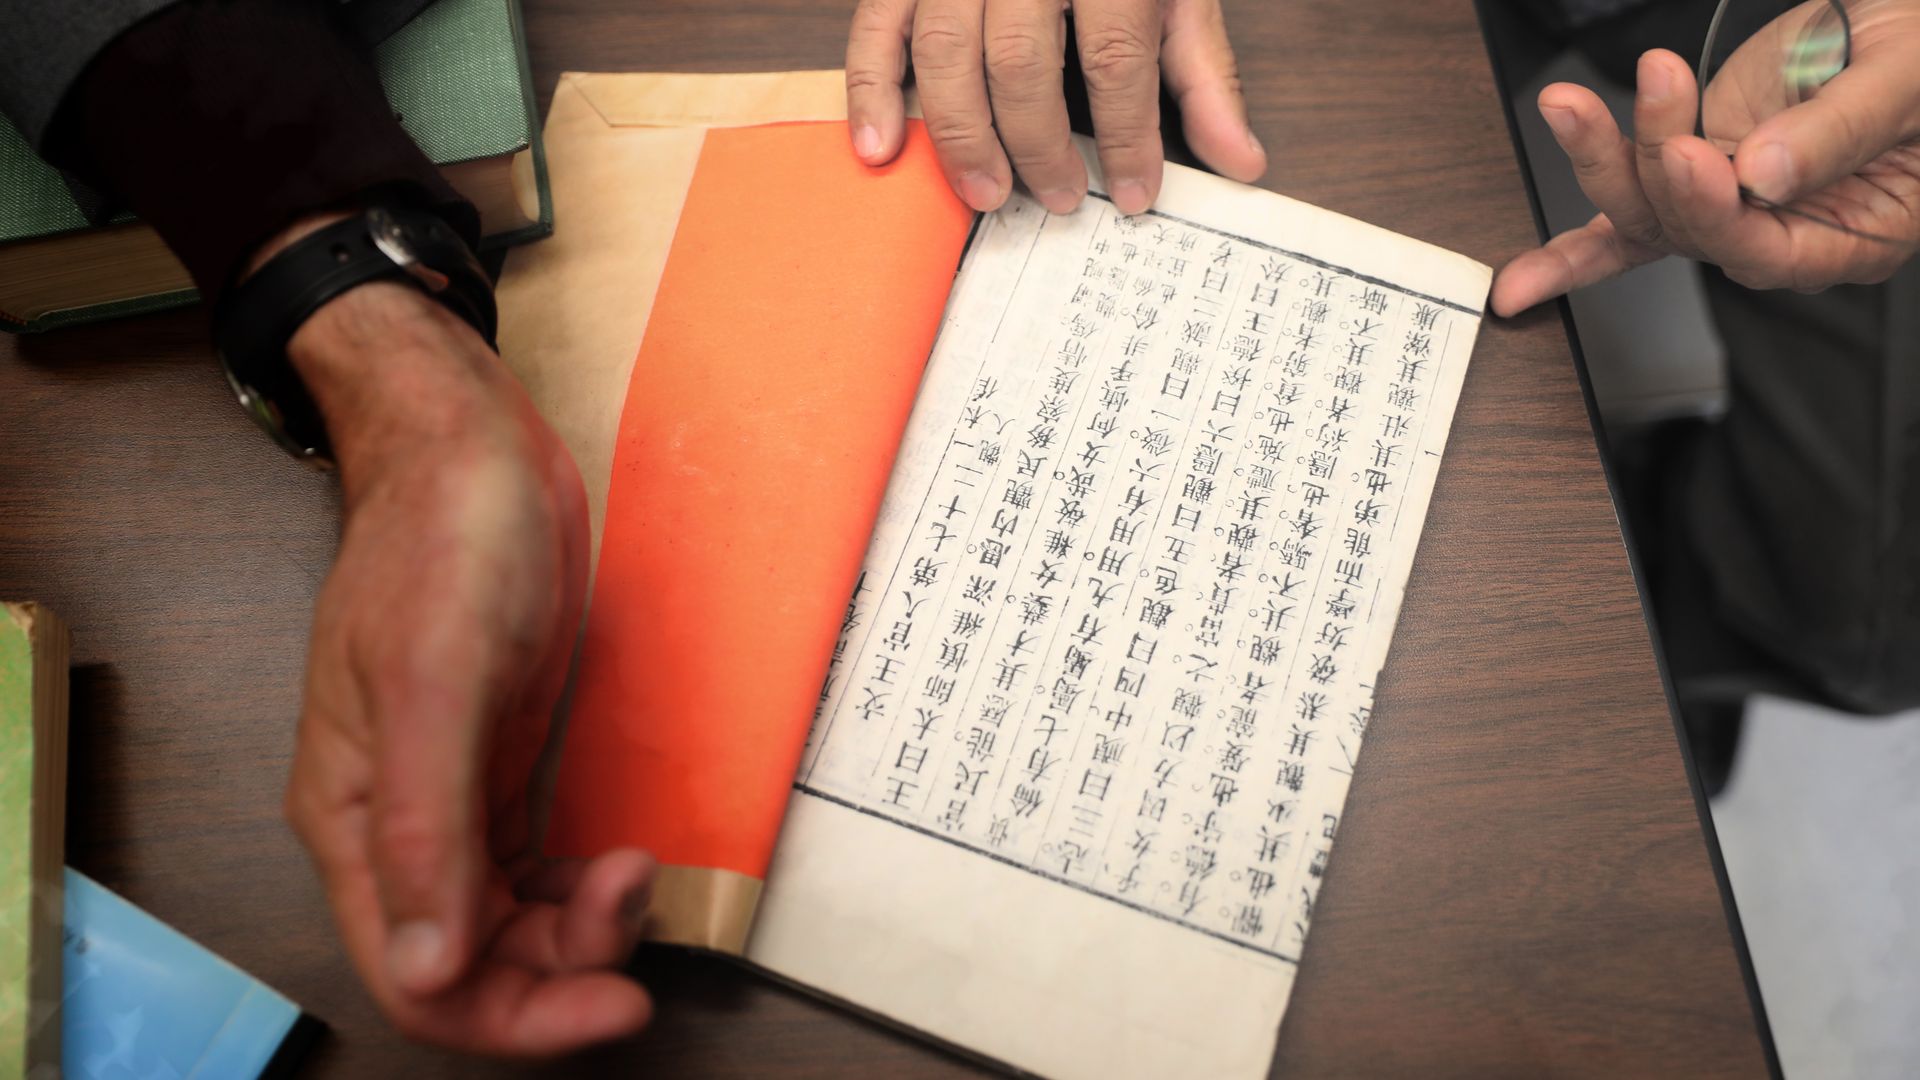 Historical Chinese documents at San Francisco State University